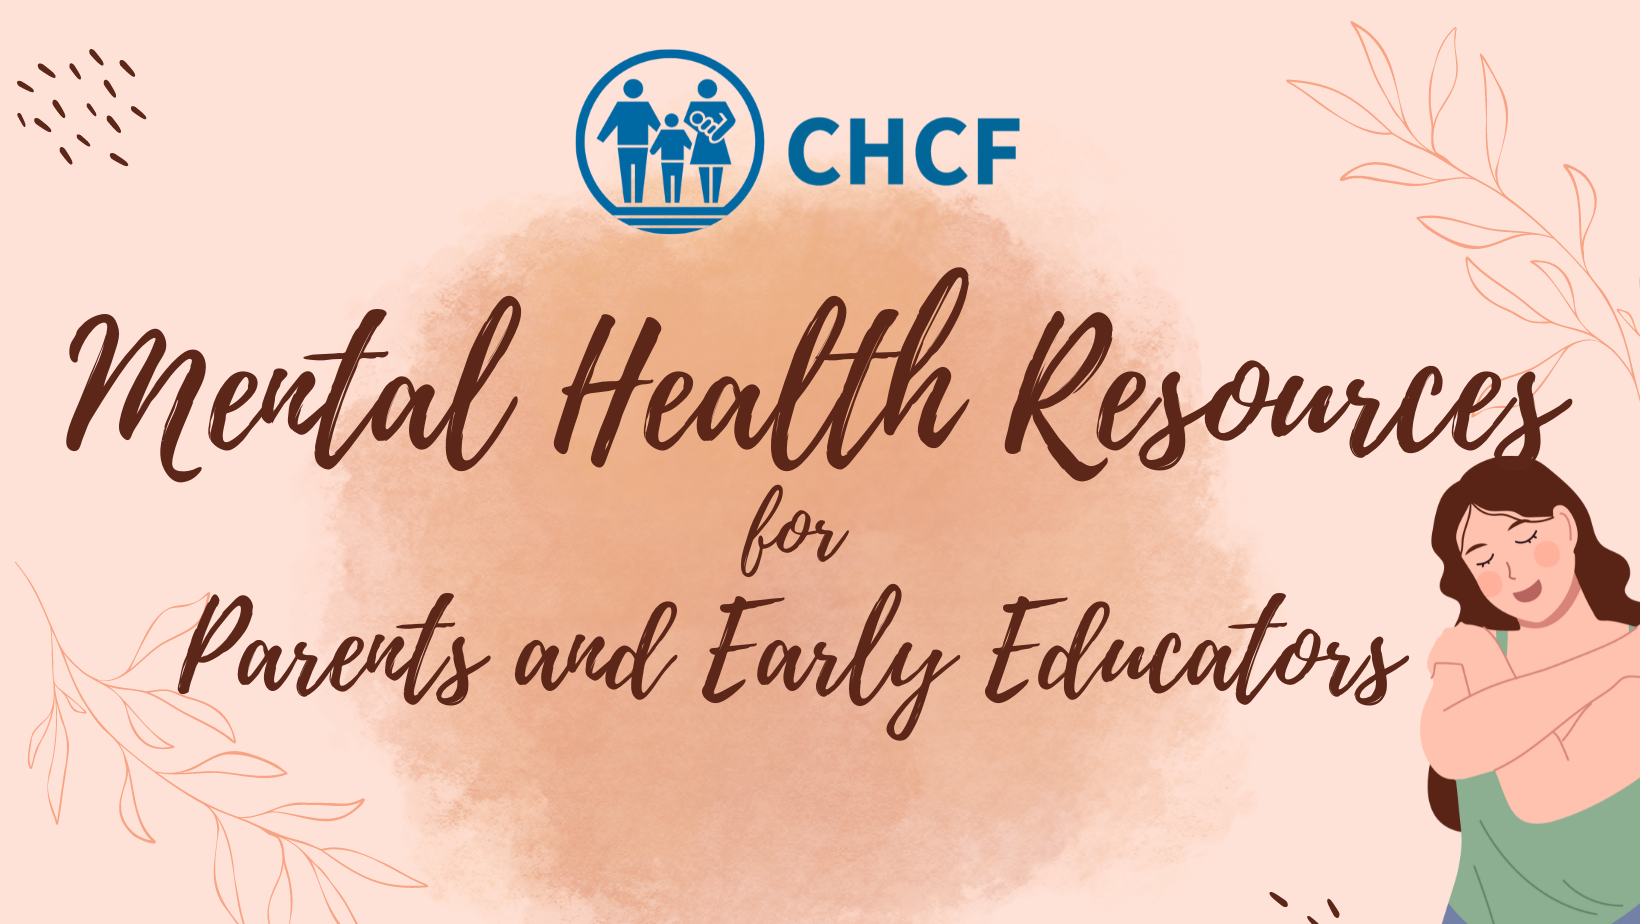 Are you a parent whose child needs mental health support? These resources can help you.